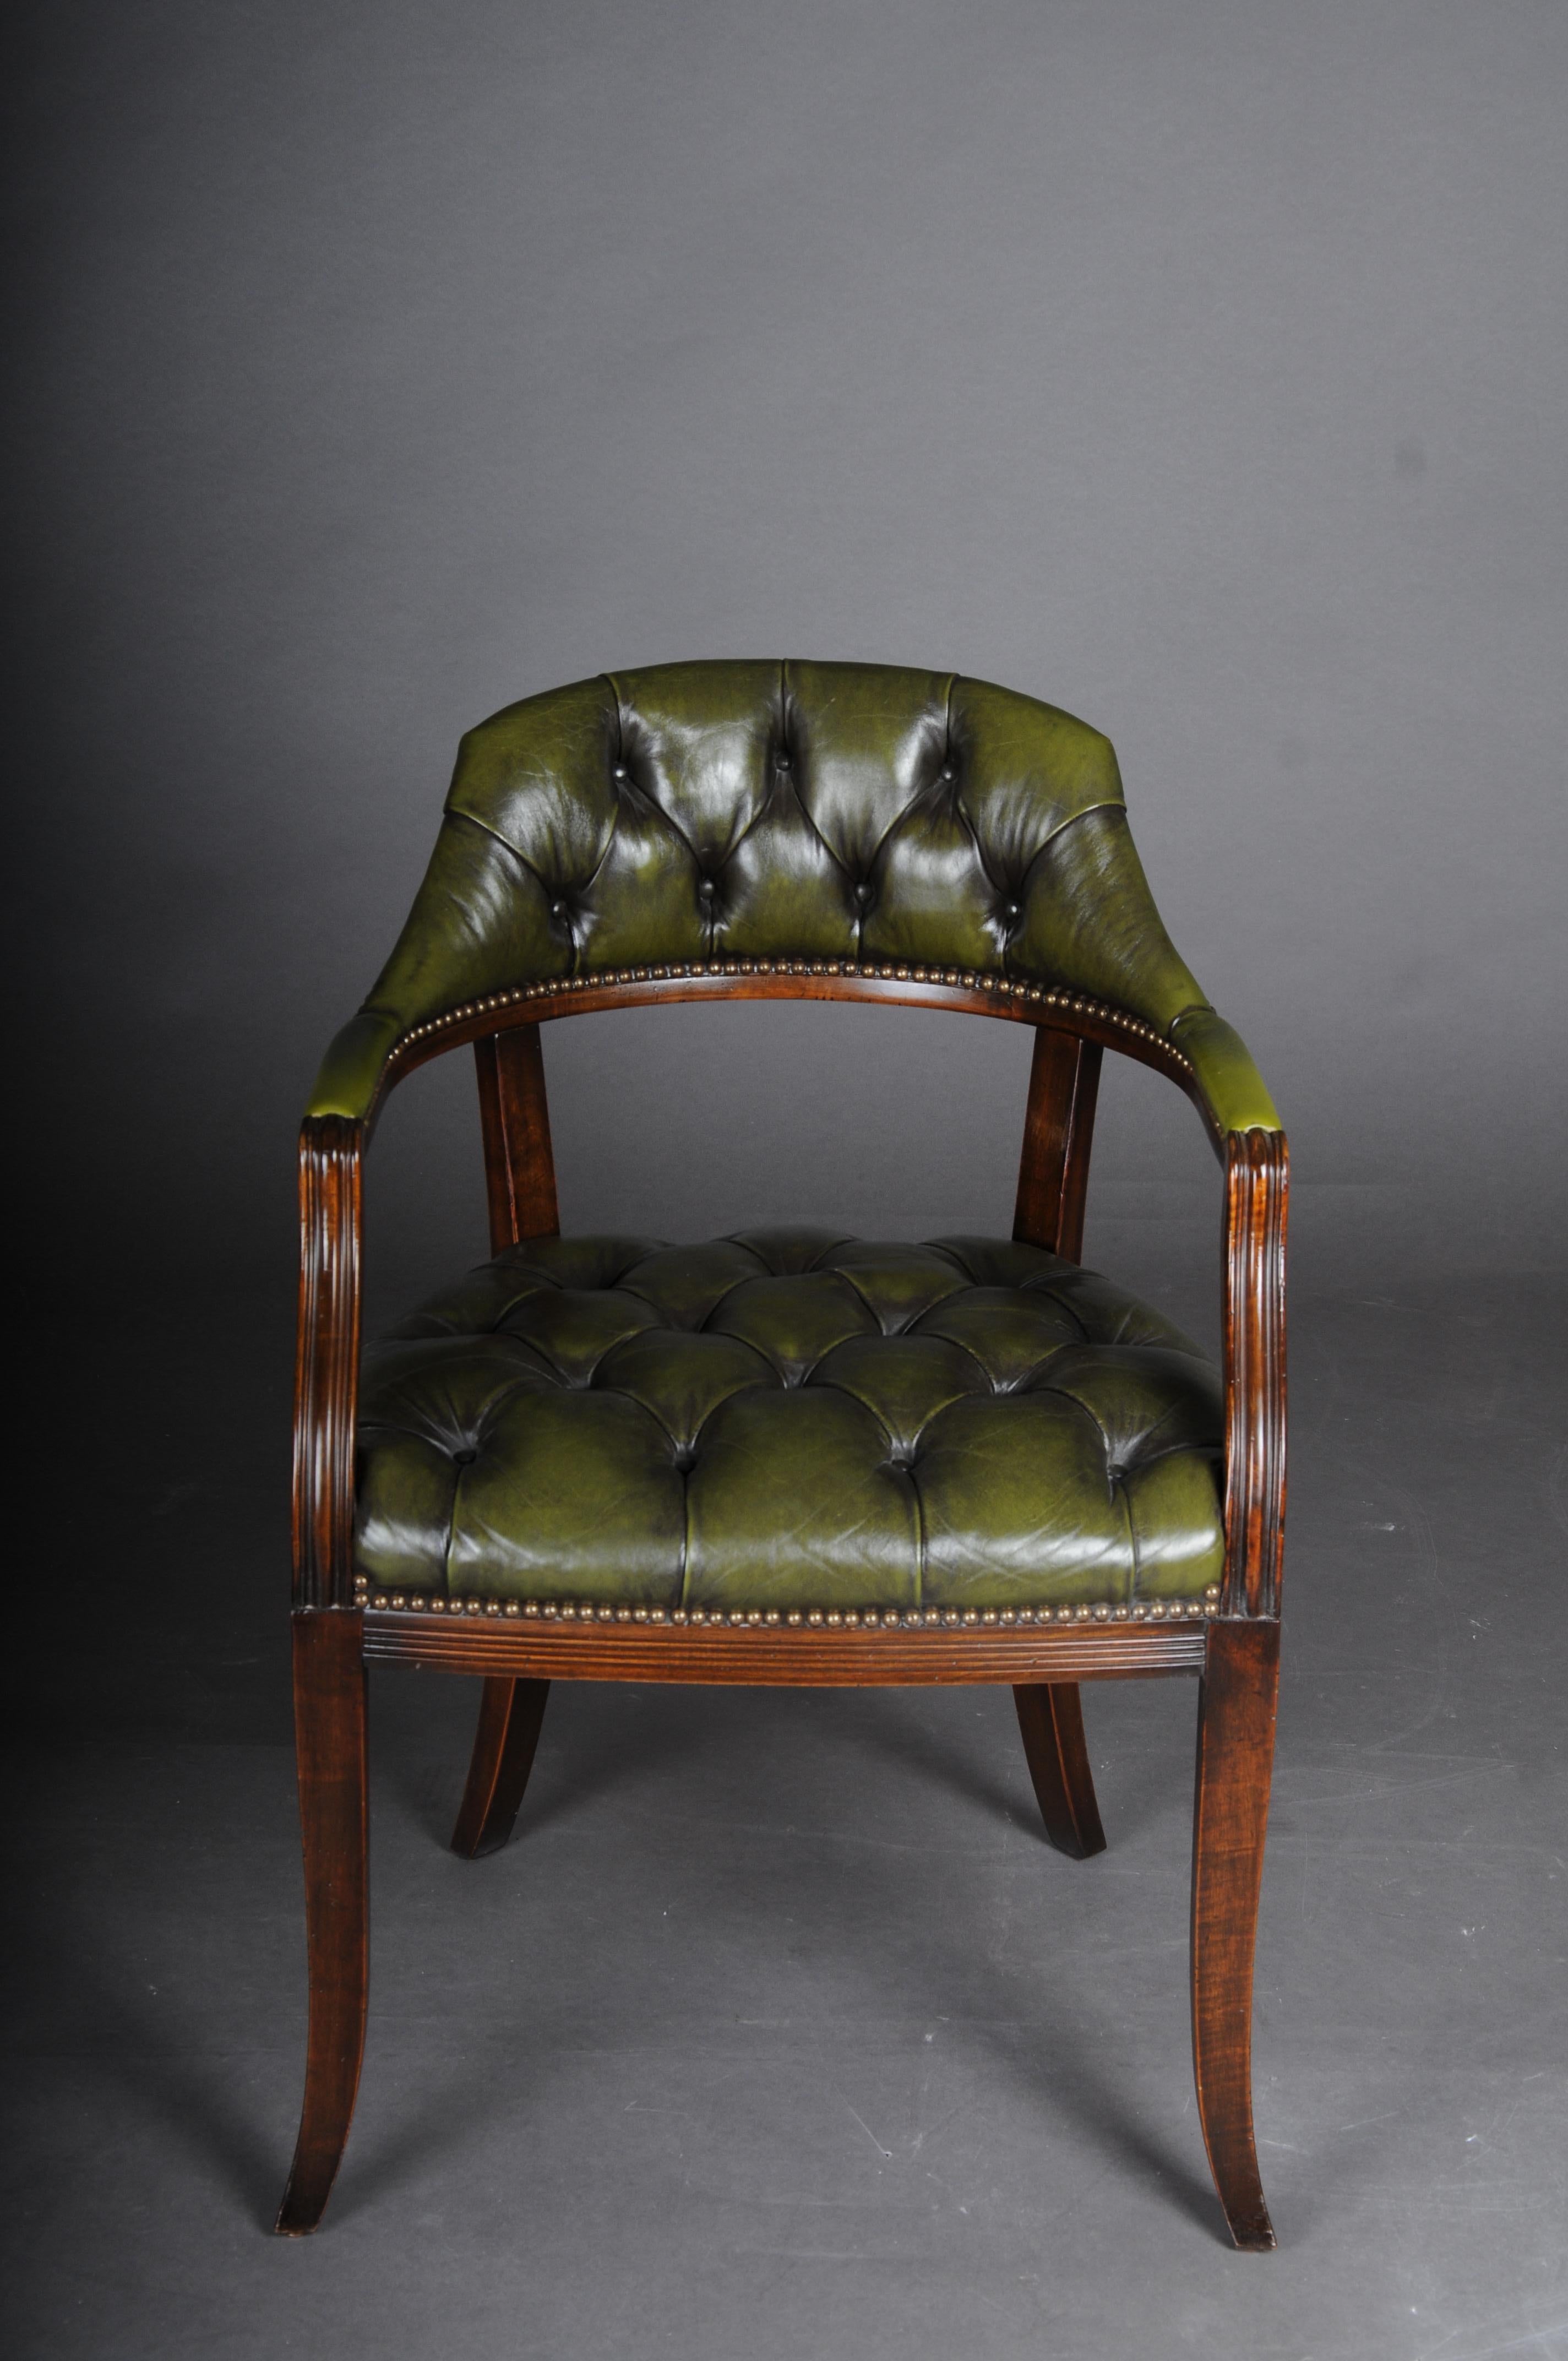 Classic English armchair, Chesterfield leather, green

Solid wood, stained mahogany. Seat and back upholstered in green Chesterfield leather.

Very high quality and classic shape.